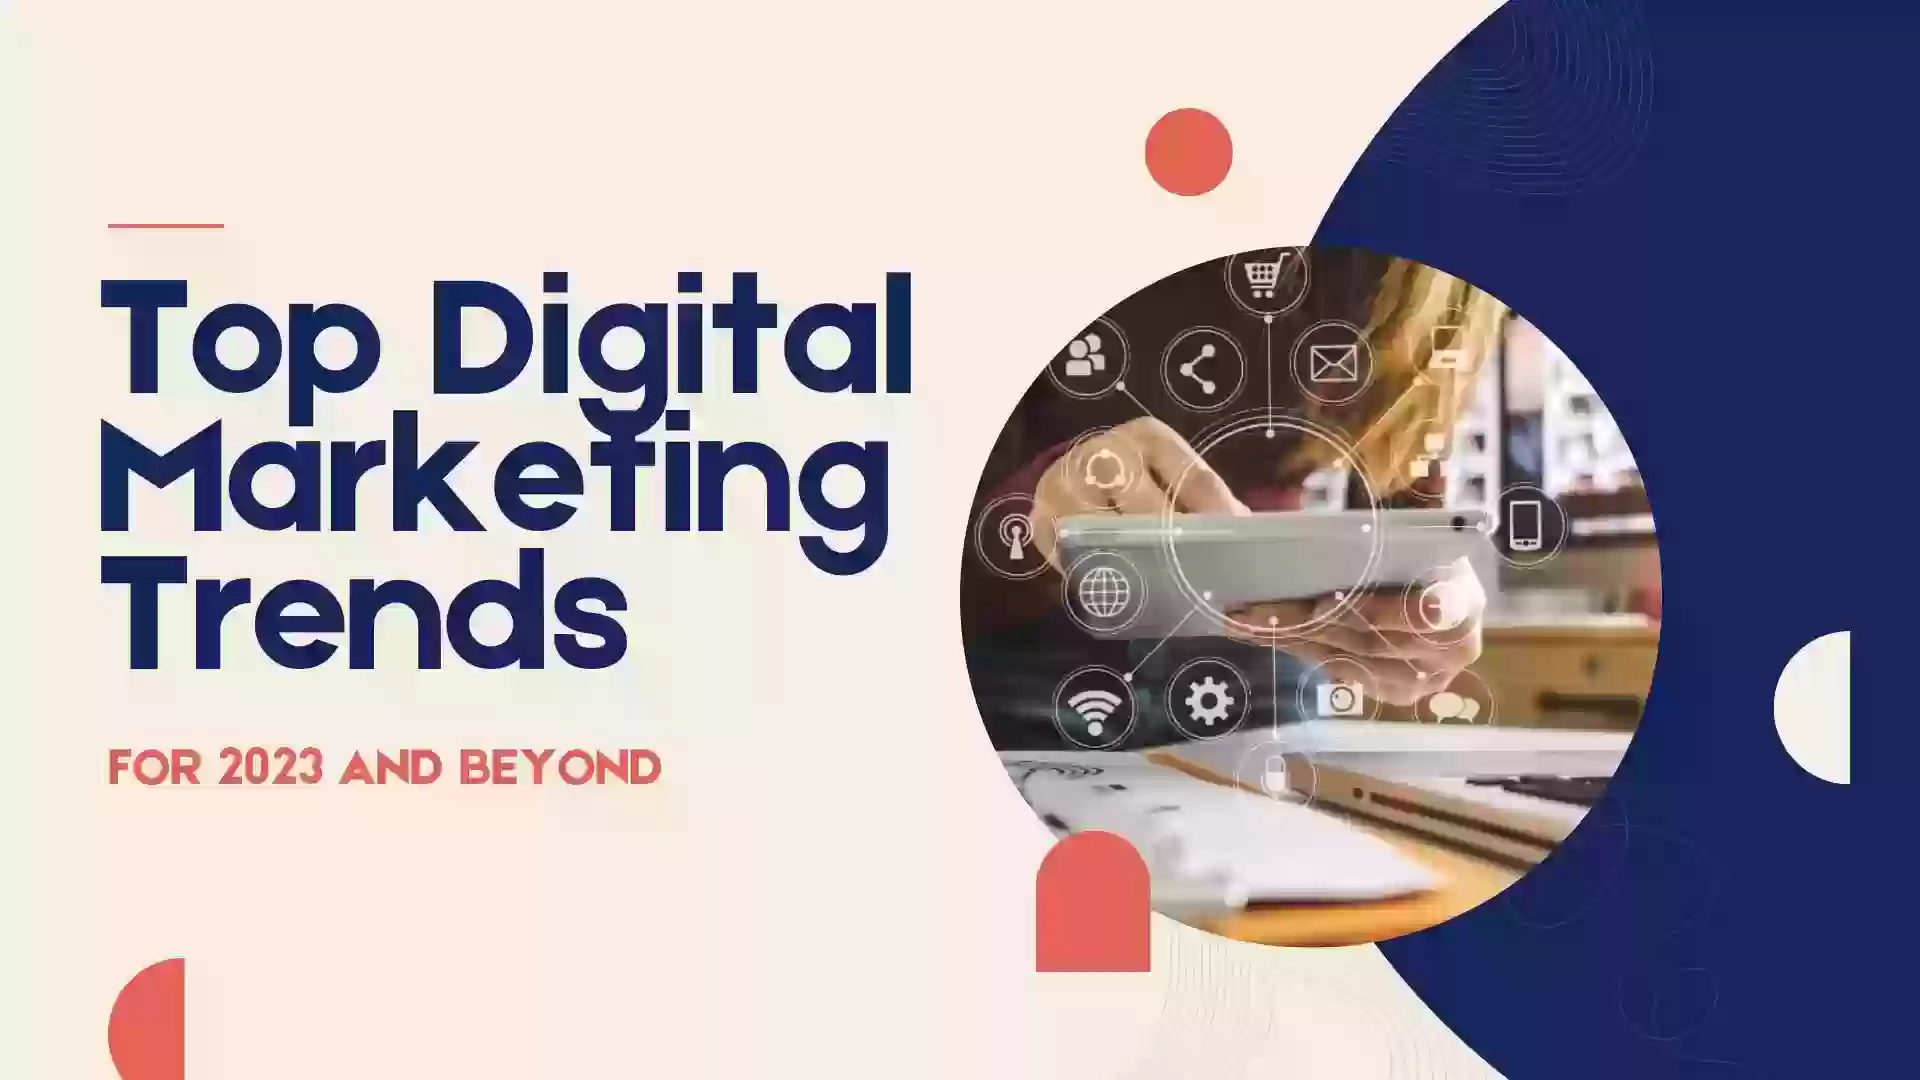 Top Digital Marketing Trends for 2023 and Beyond